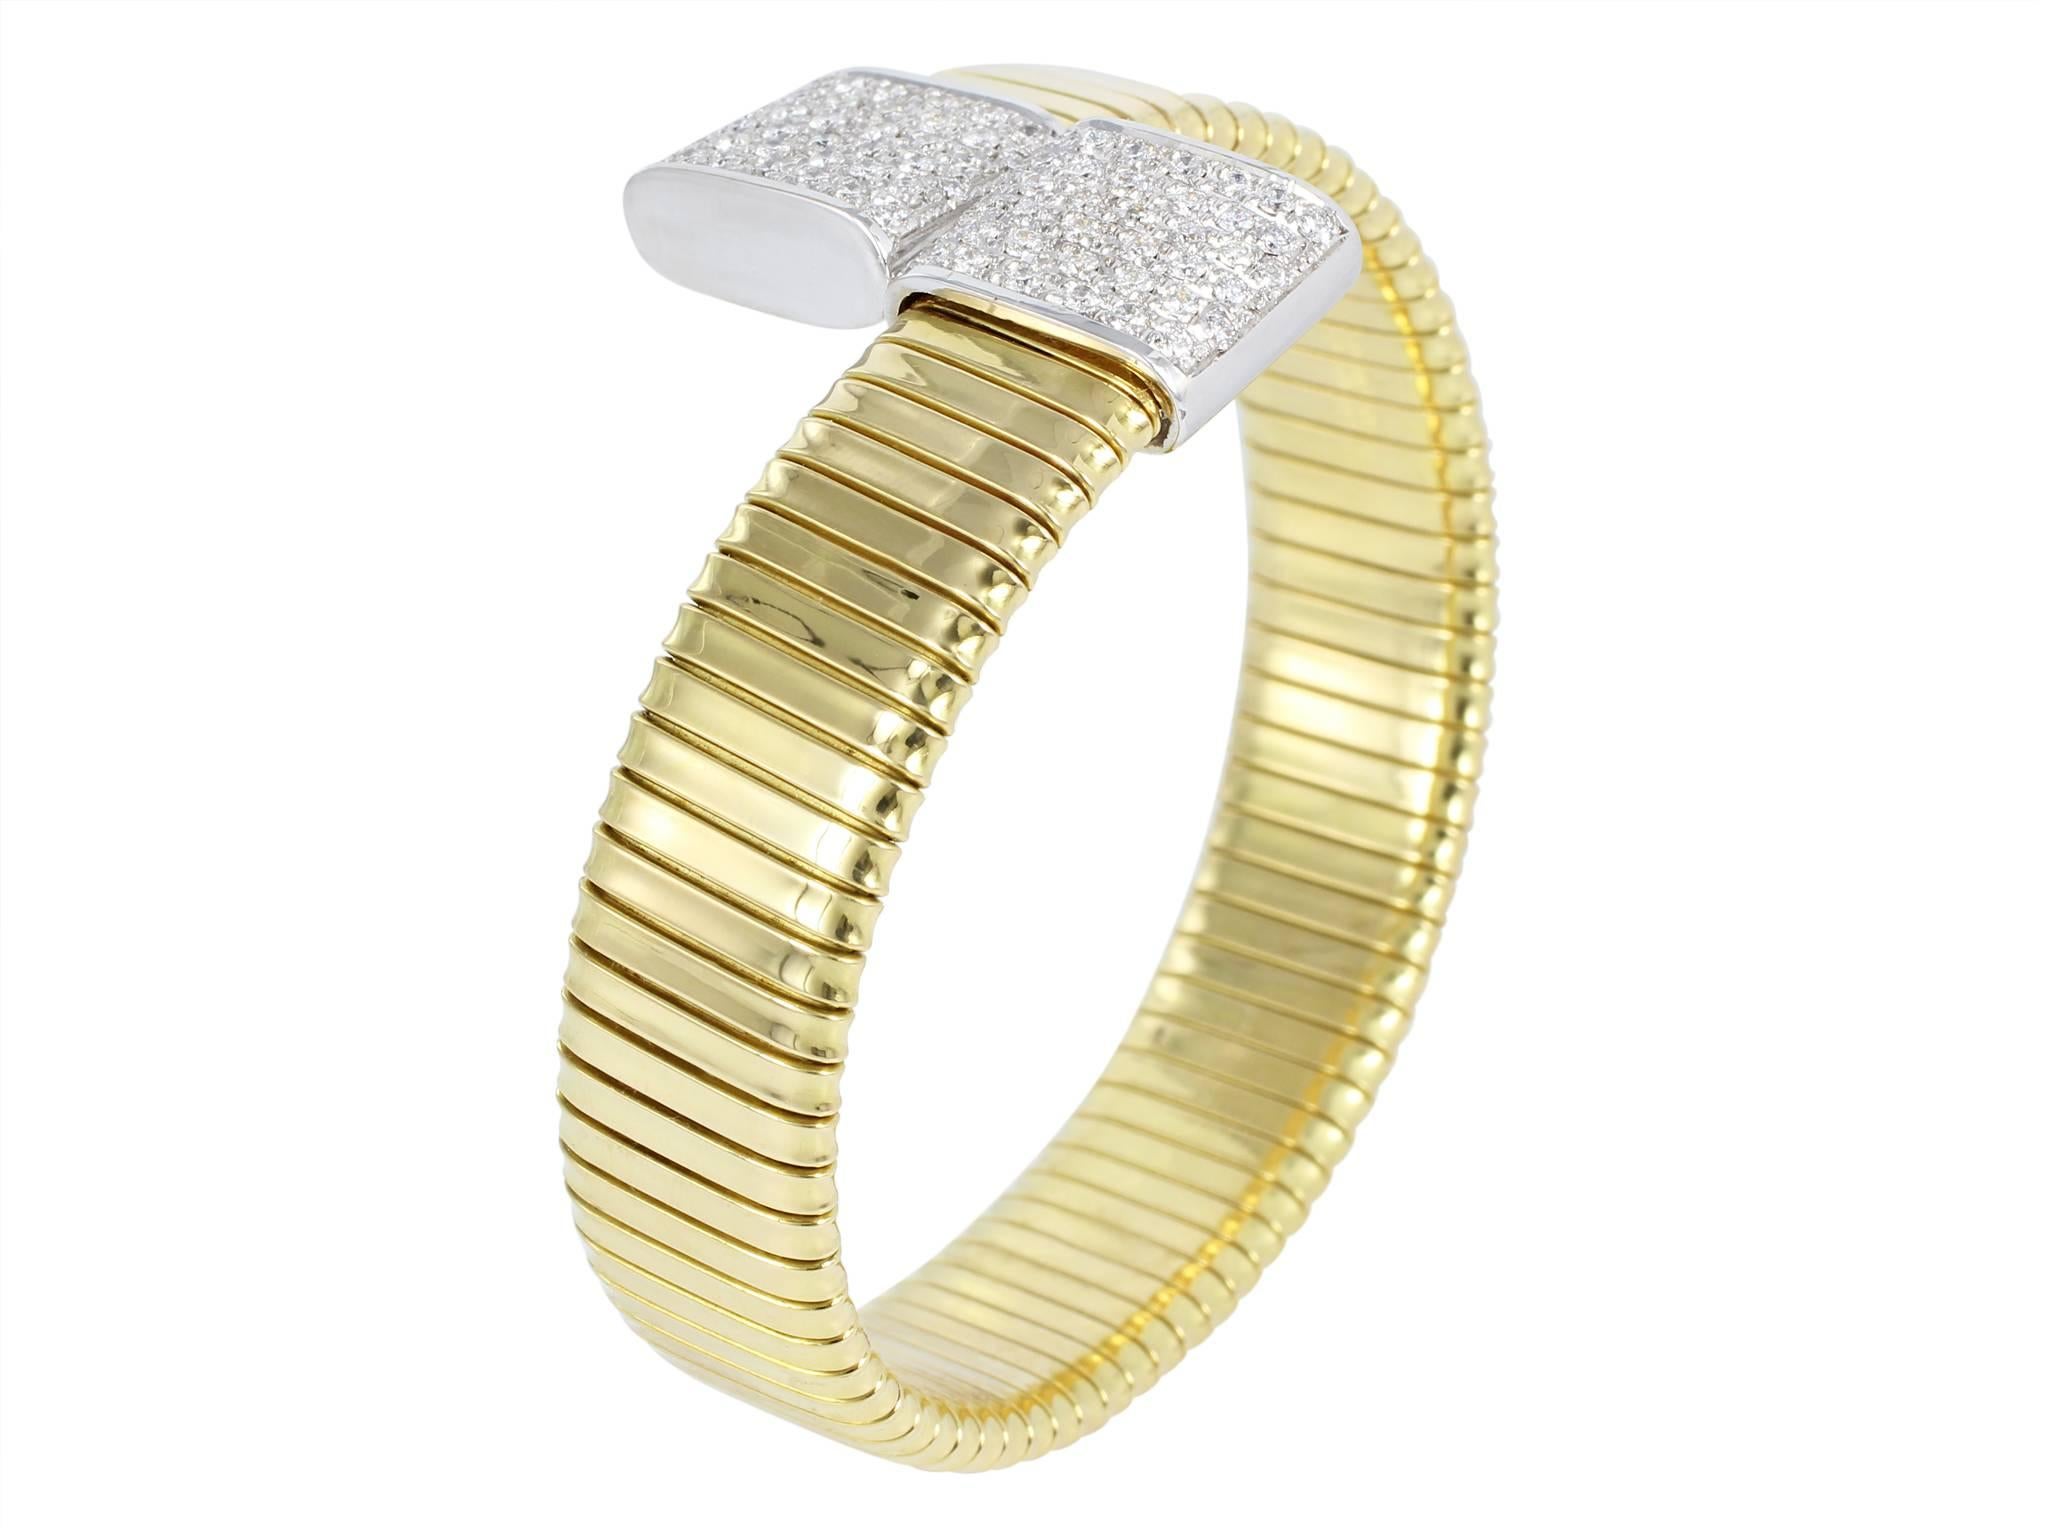 18 karat two tone yellow and white gold flexible flat coil style bypass cuff bracelet consisting of 2 end caps accented with pave set full cut diamonds having a total weight of 1.15 carats.